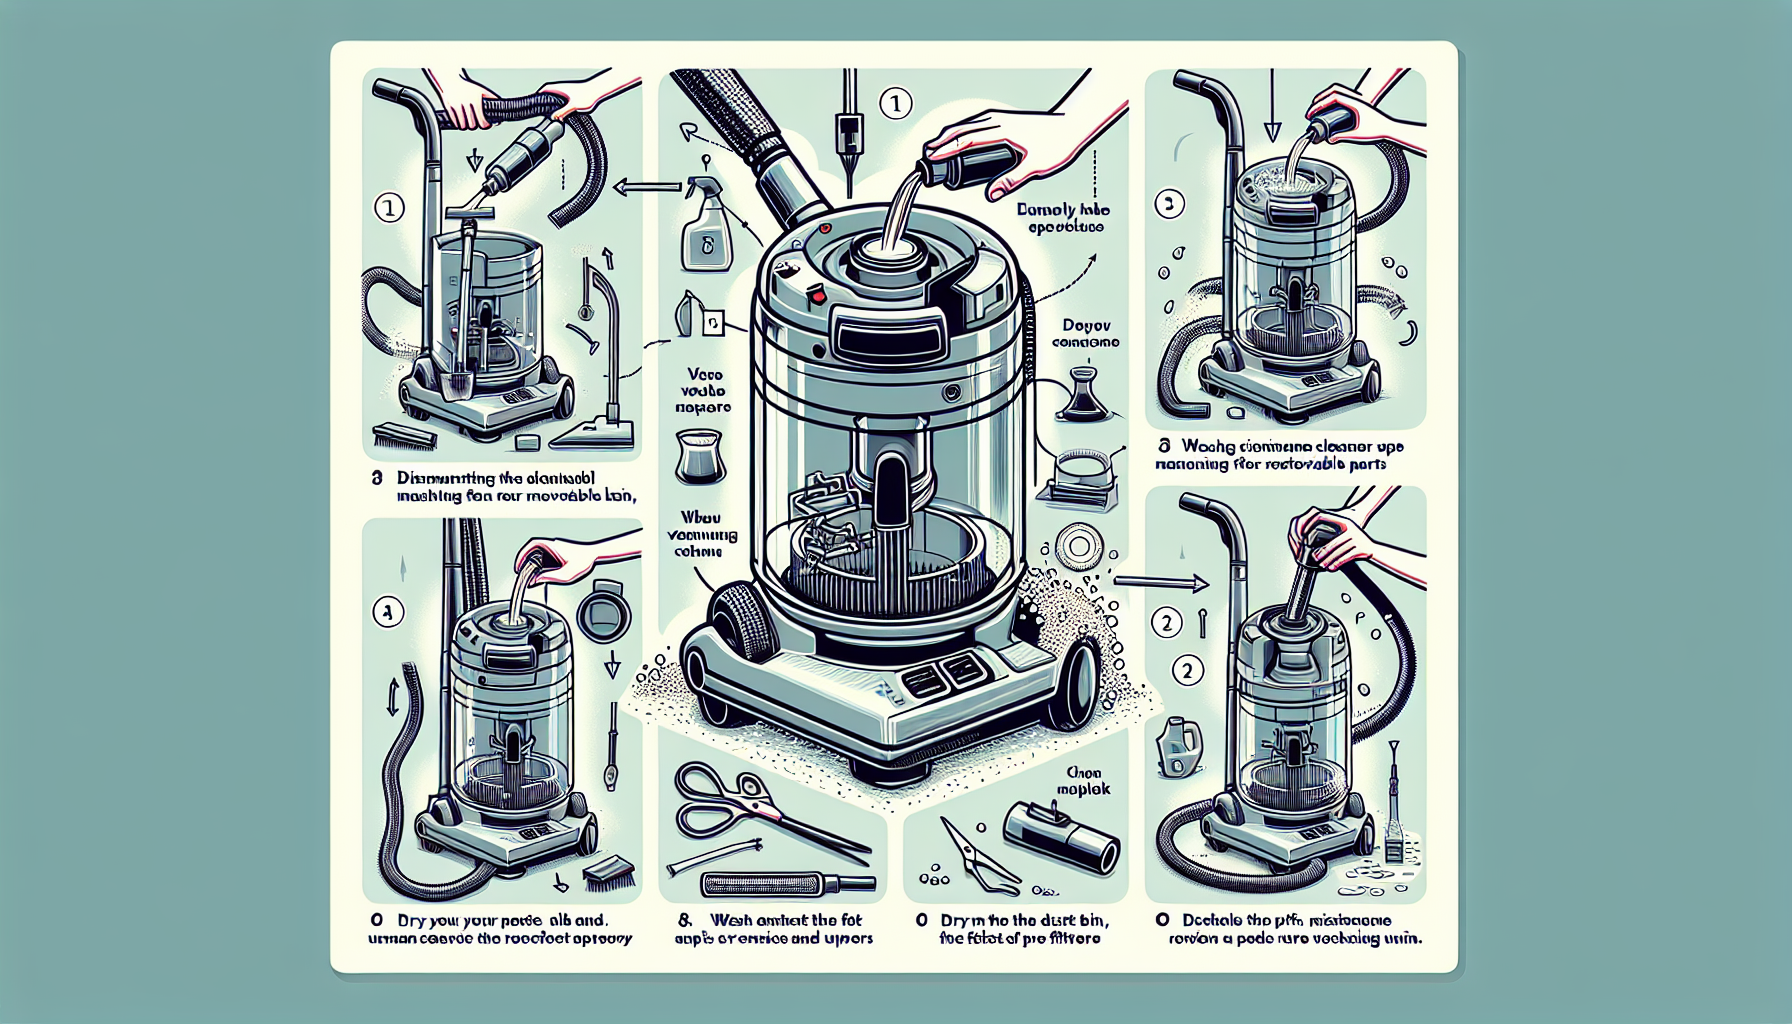 How To Clean Dyson Vacuum